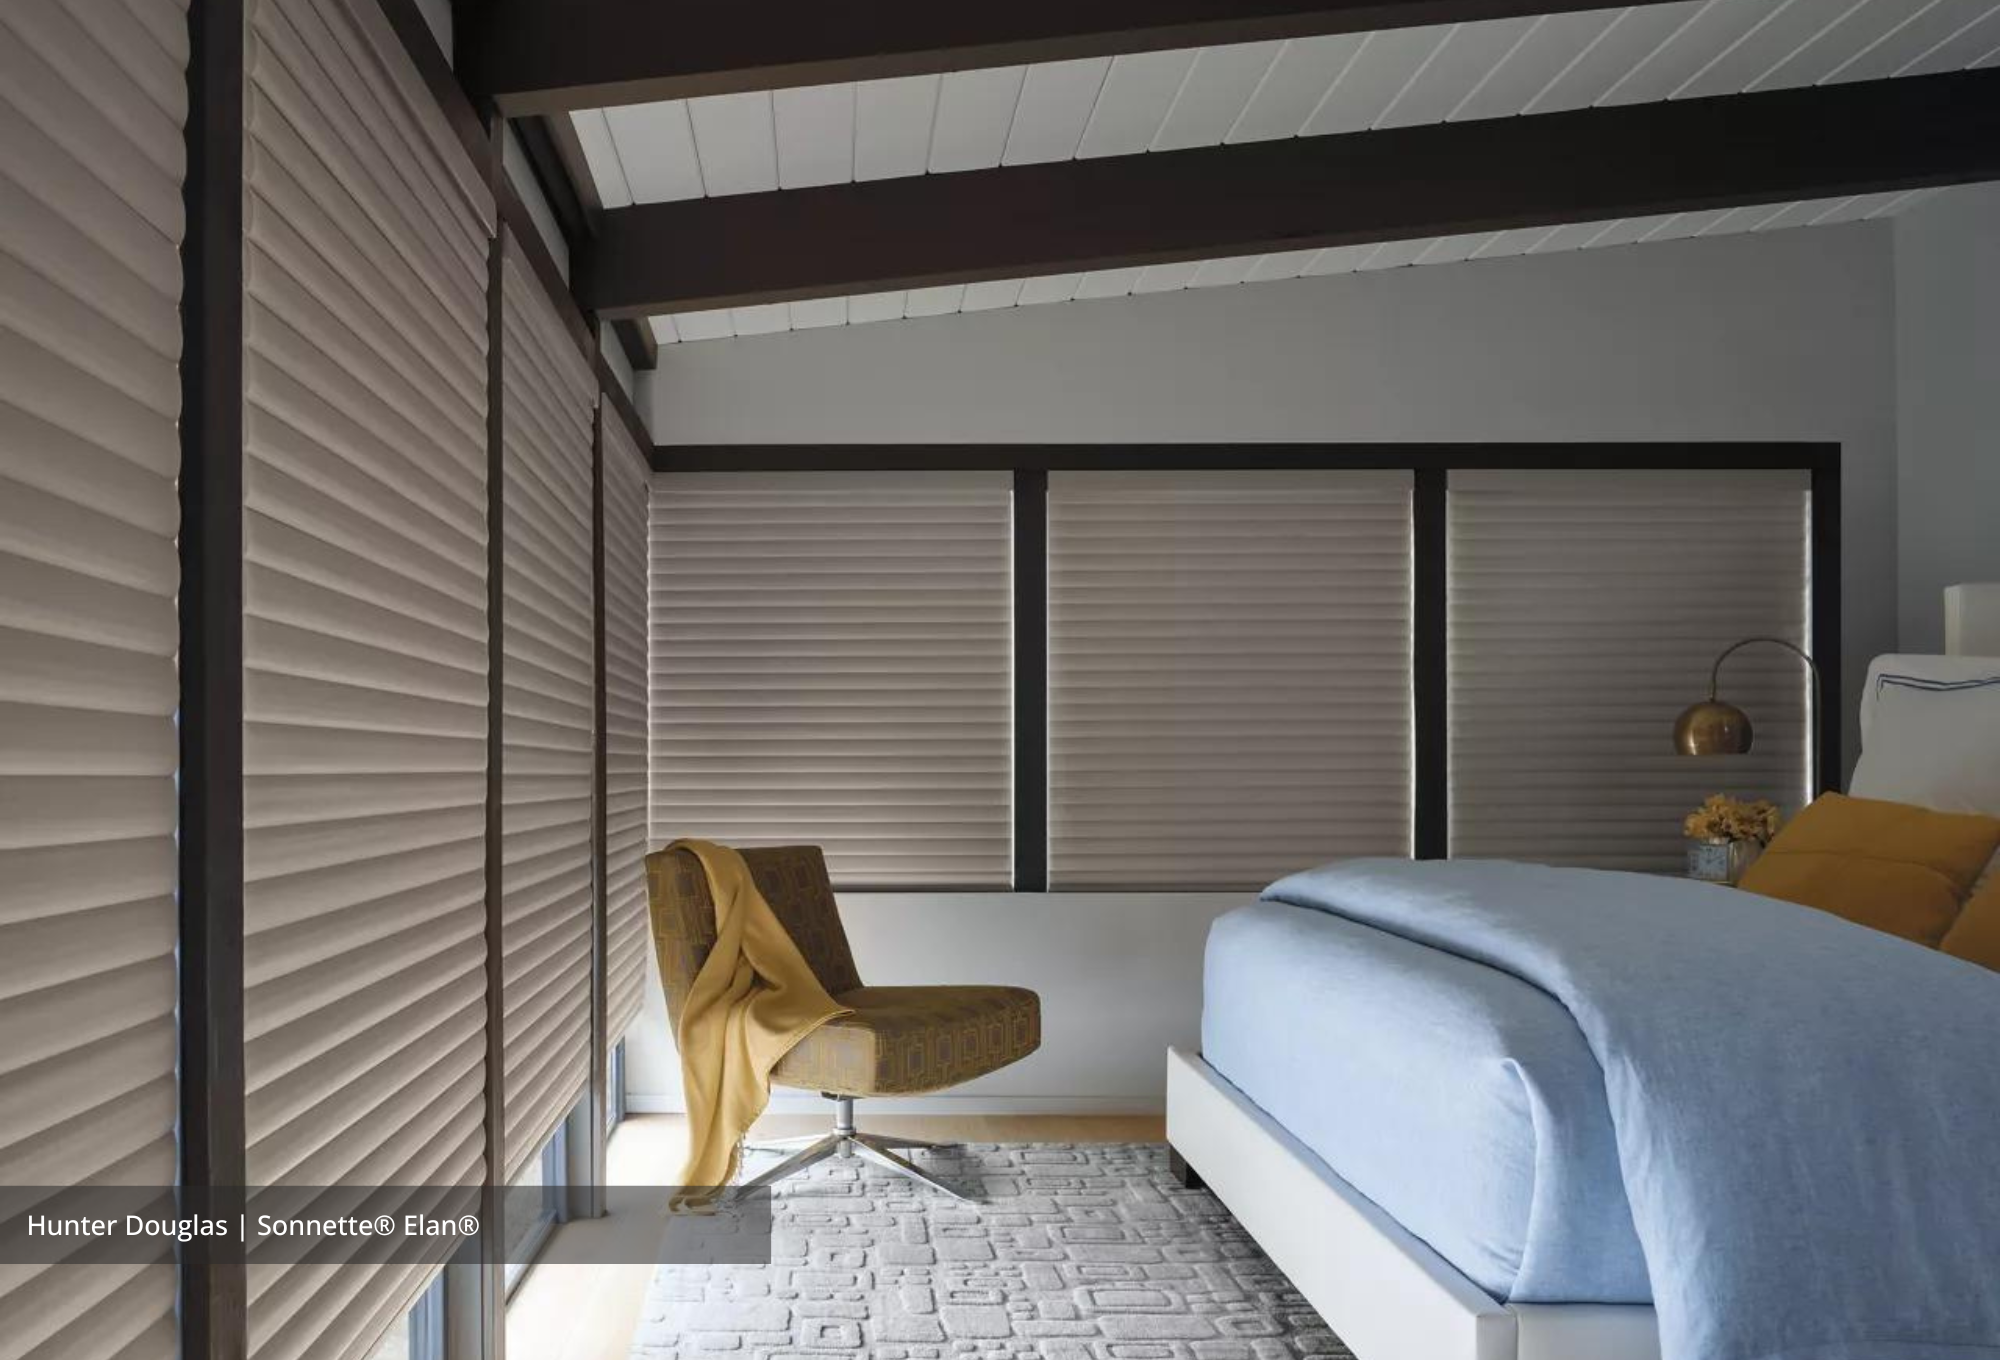 New window treatments can transform your space instantly. Hunter Douglas window treatments near Chicago, Illinois (IL)New window treatments can transform your space instantly. Hunter Douglas window treatments near Chicago, Illinois (IL)